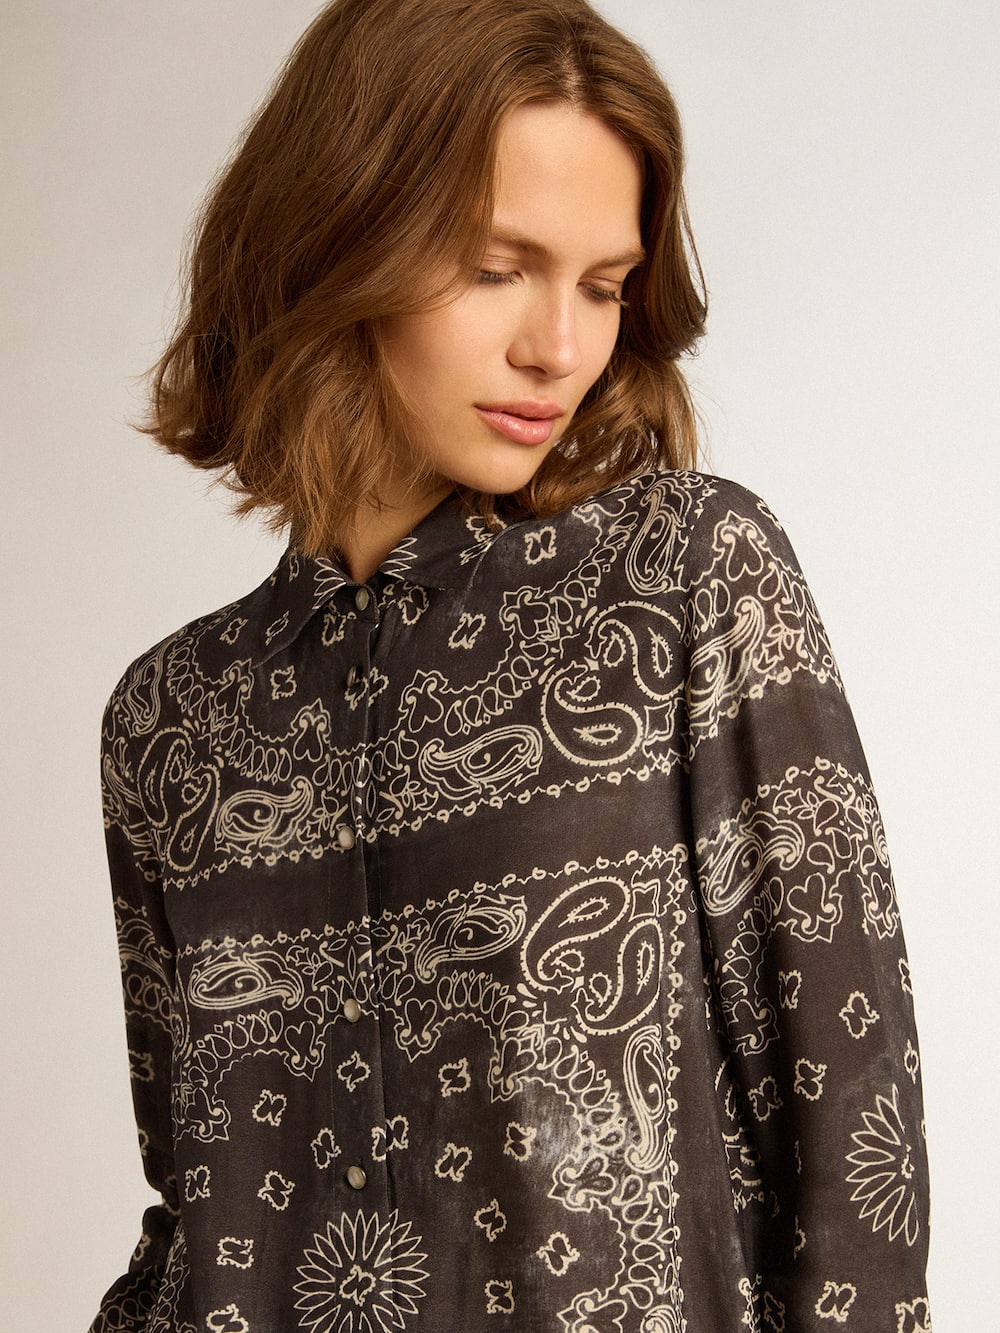 Golden Goose - Pajama shirt in anthracite gray with paisley print in 